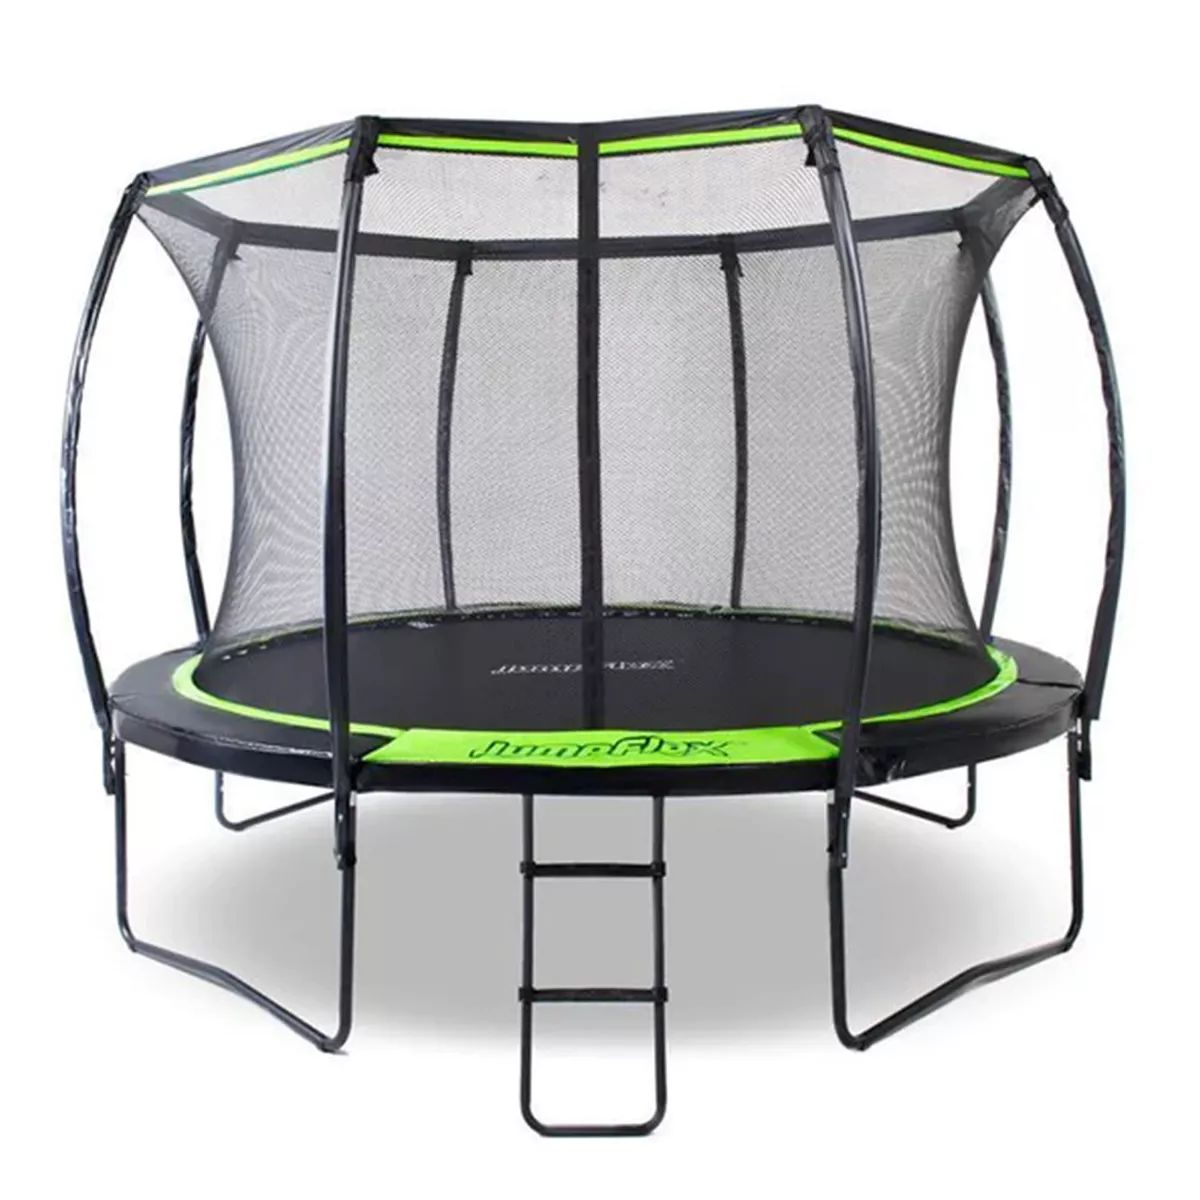 Jumpflex Flex120 12 Foot Trampoline with Enclosure and Ladder, Black and Green | Target